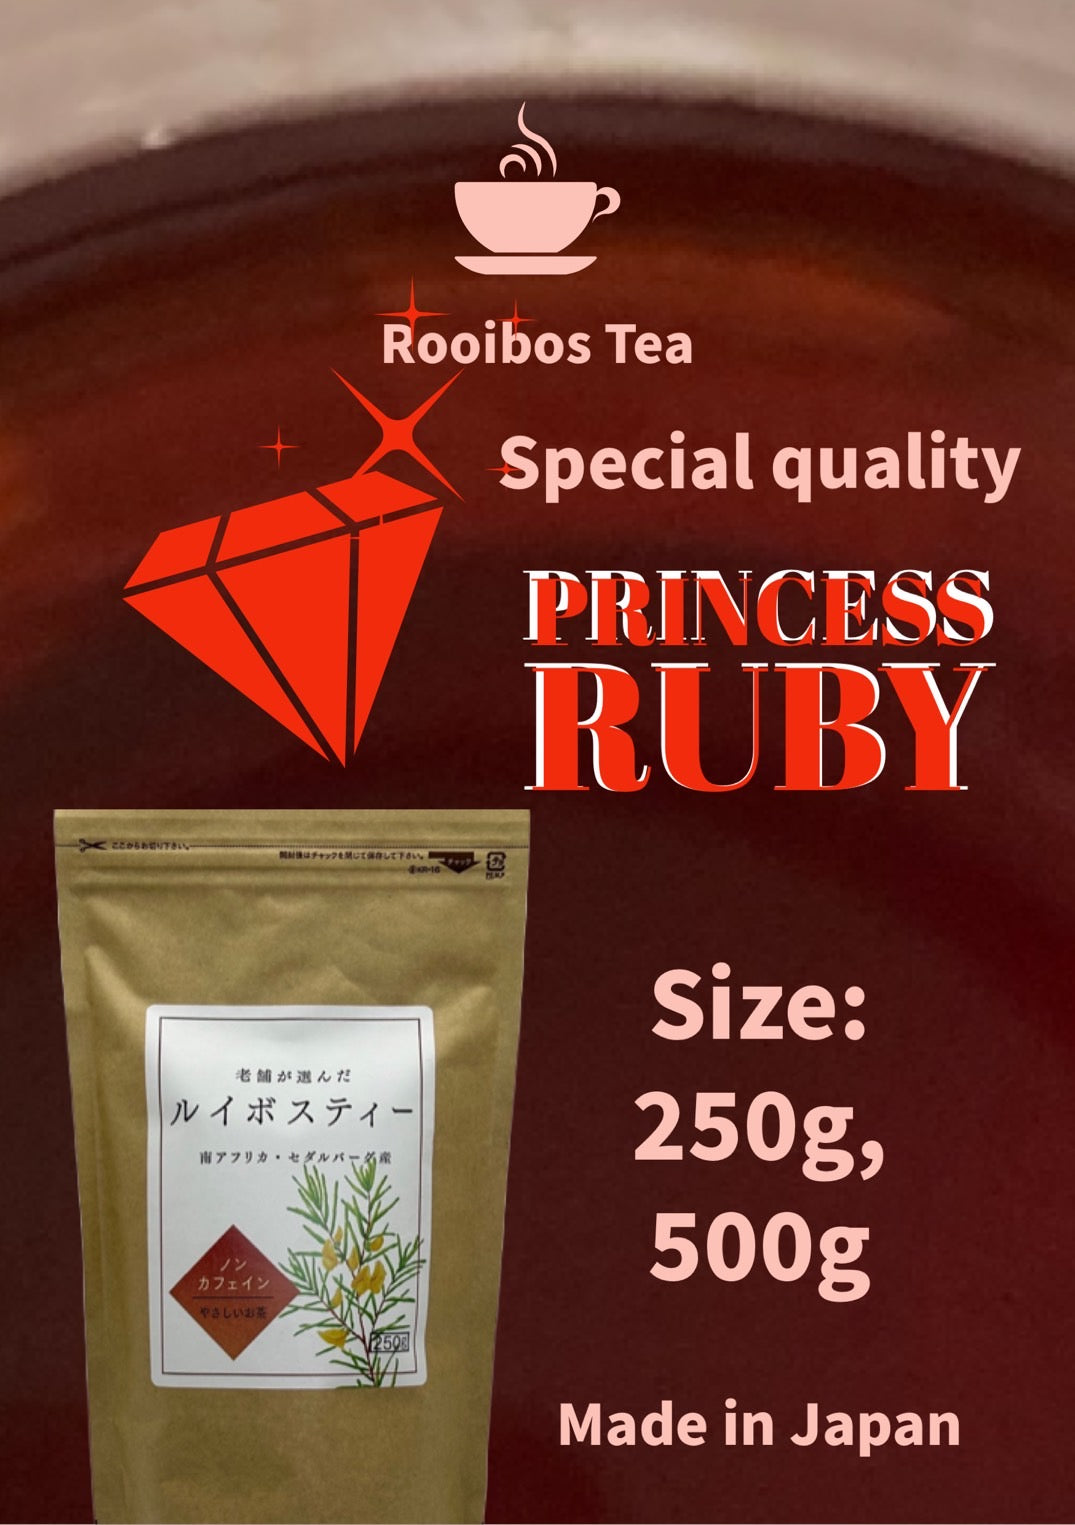 Rooibos tea special quality "Princess RUBY" size 250g made in Japan